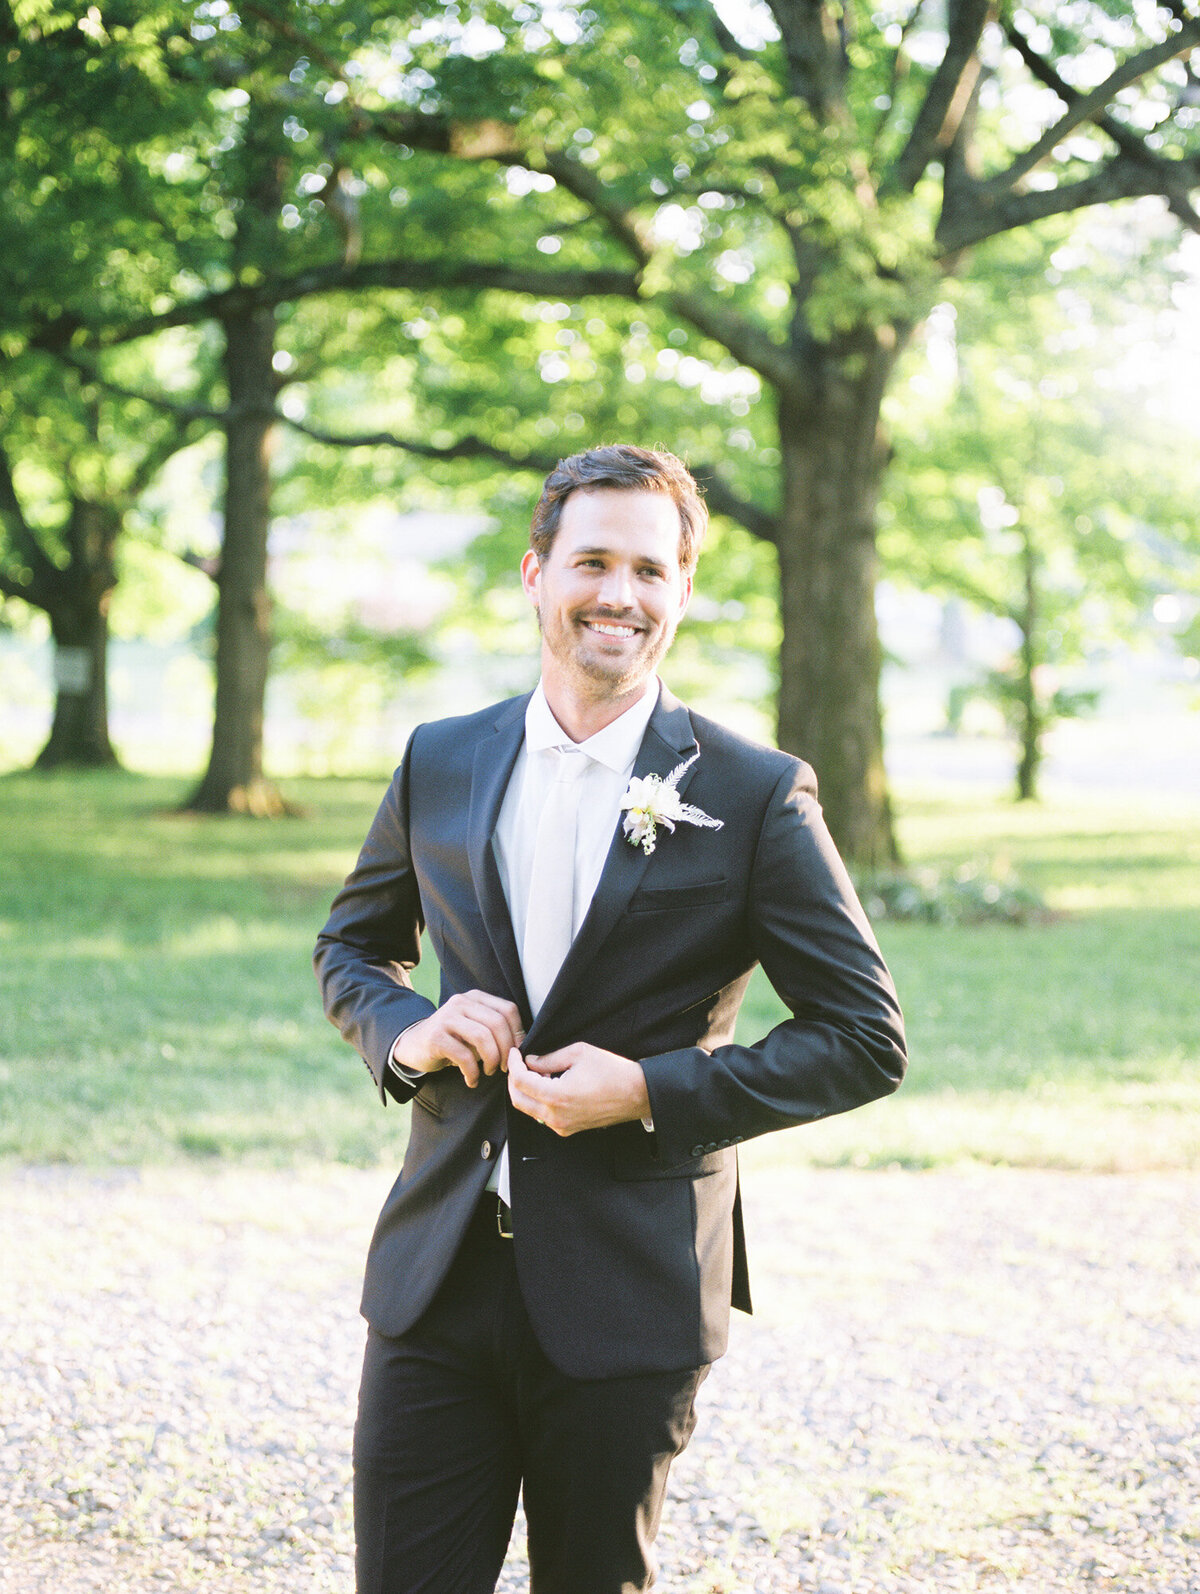 A handsome groom buttons his jacket in front of the lush greenery by Birmingham wedding photographer, Kelsey Dawn Photography